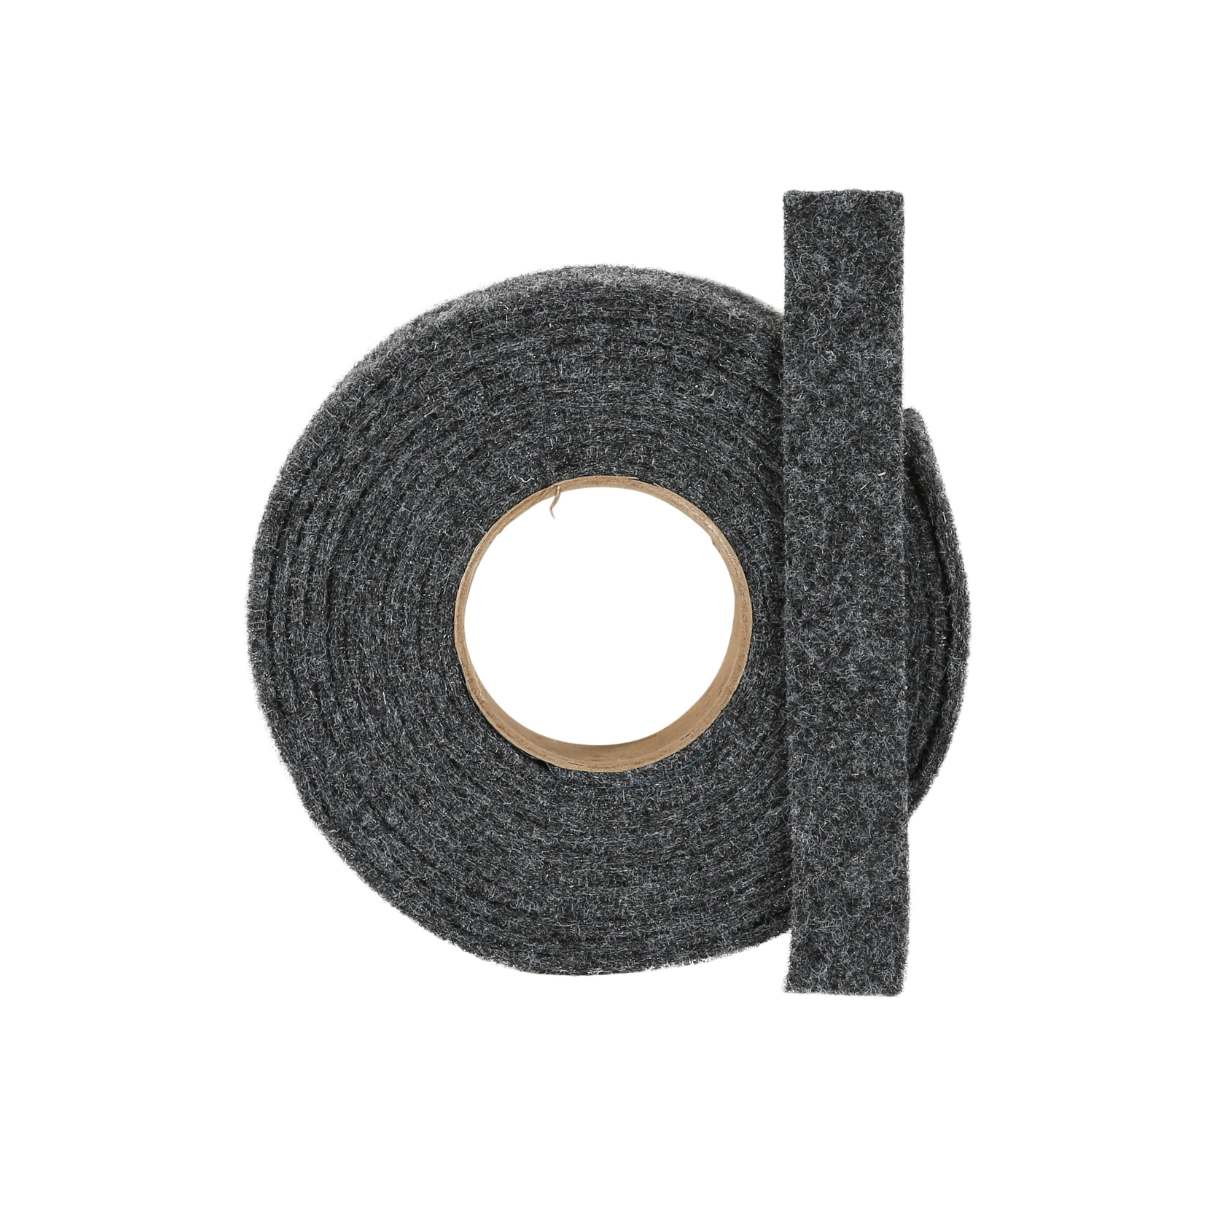 Foam Tape Weather Stripping,1/4 Inch Wide X 1/16 Inch Thick,Window  Insulation and Seal Adhesive Door Seal Strip (2 Rolls with Total 64 Feet  Long) 